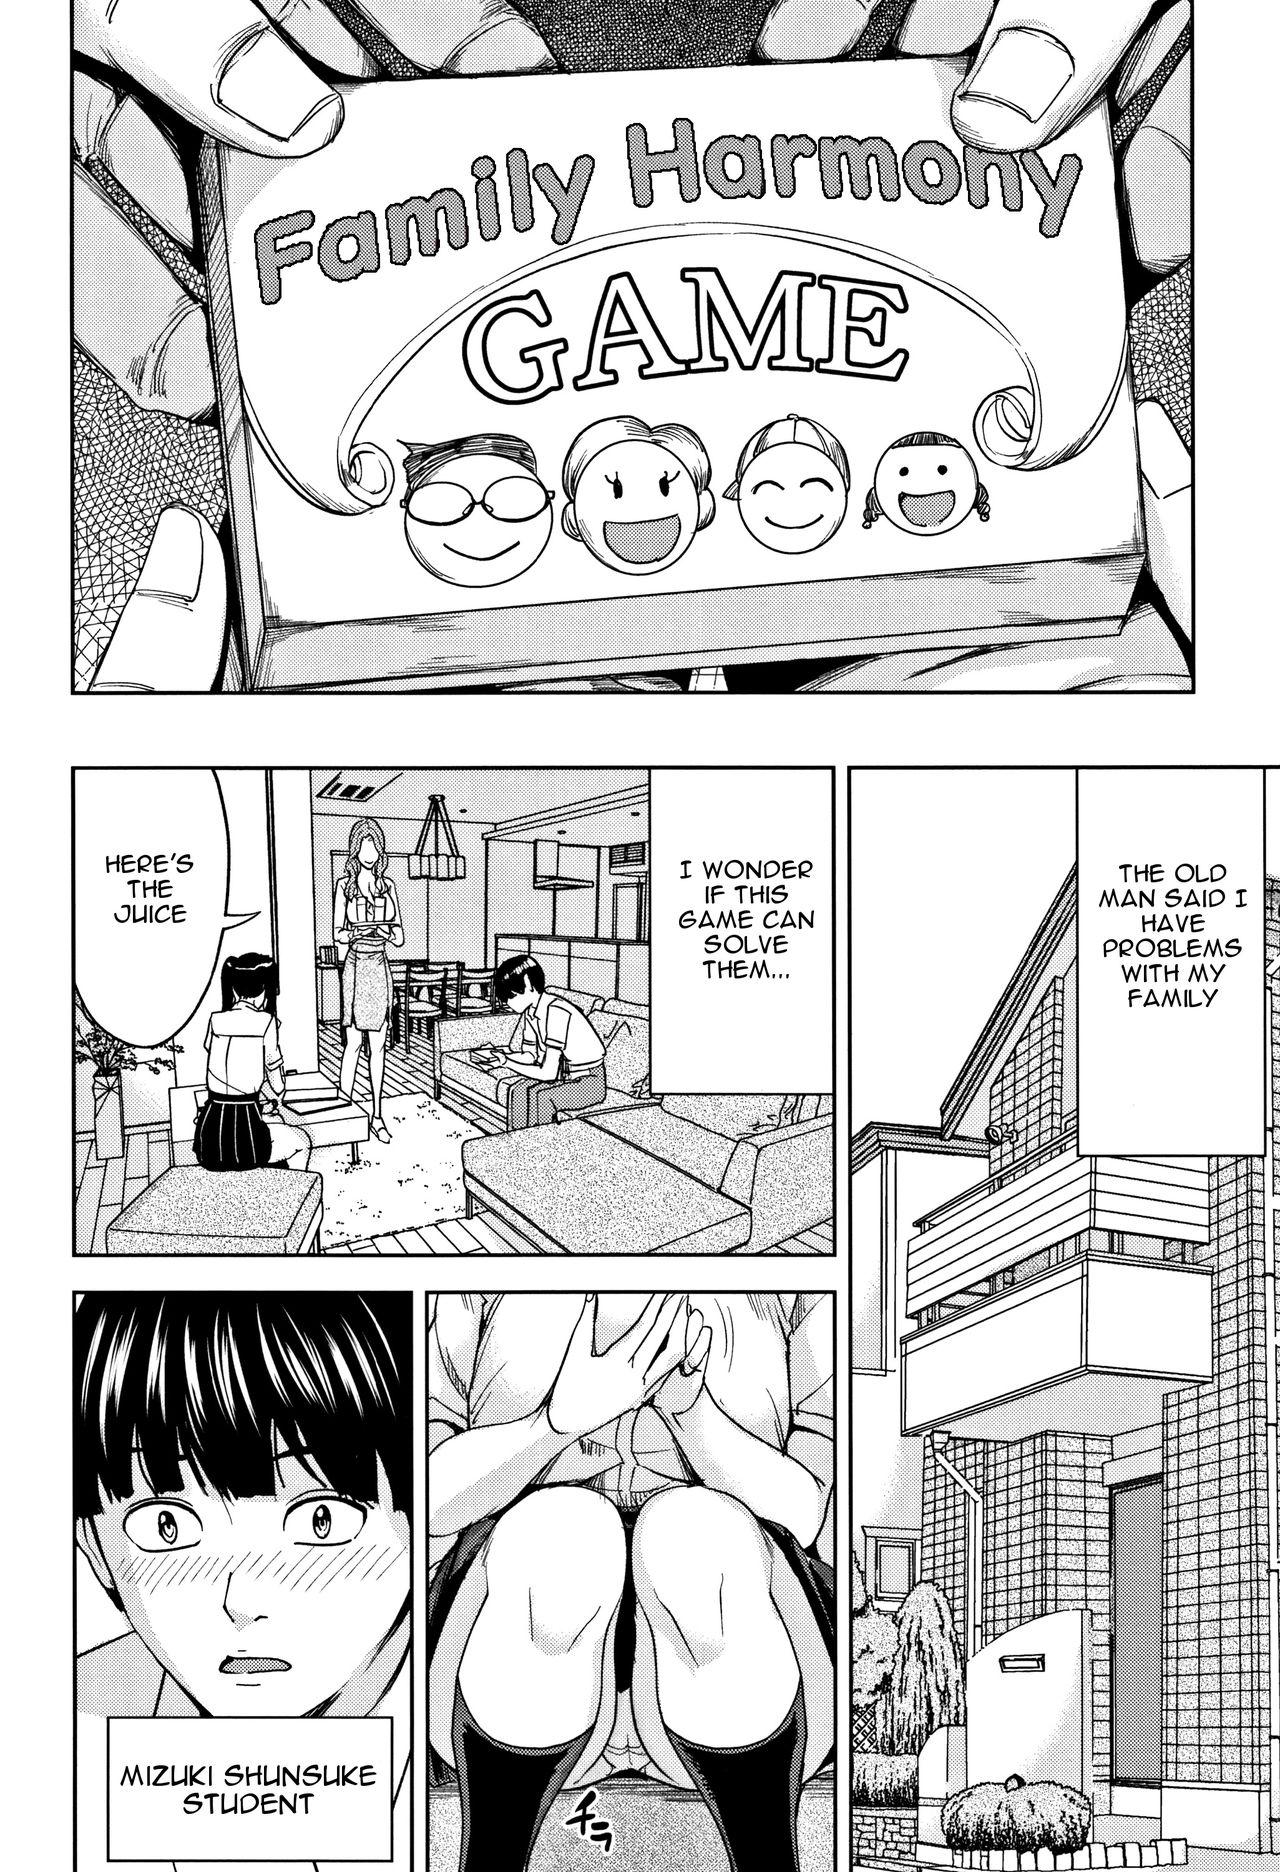 Trans Kazoku Soukan Game - family Incest game Ch. 1&2 Chichona - Page 10